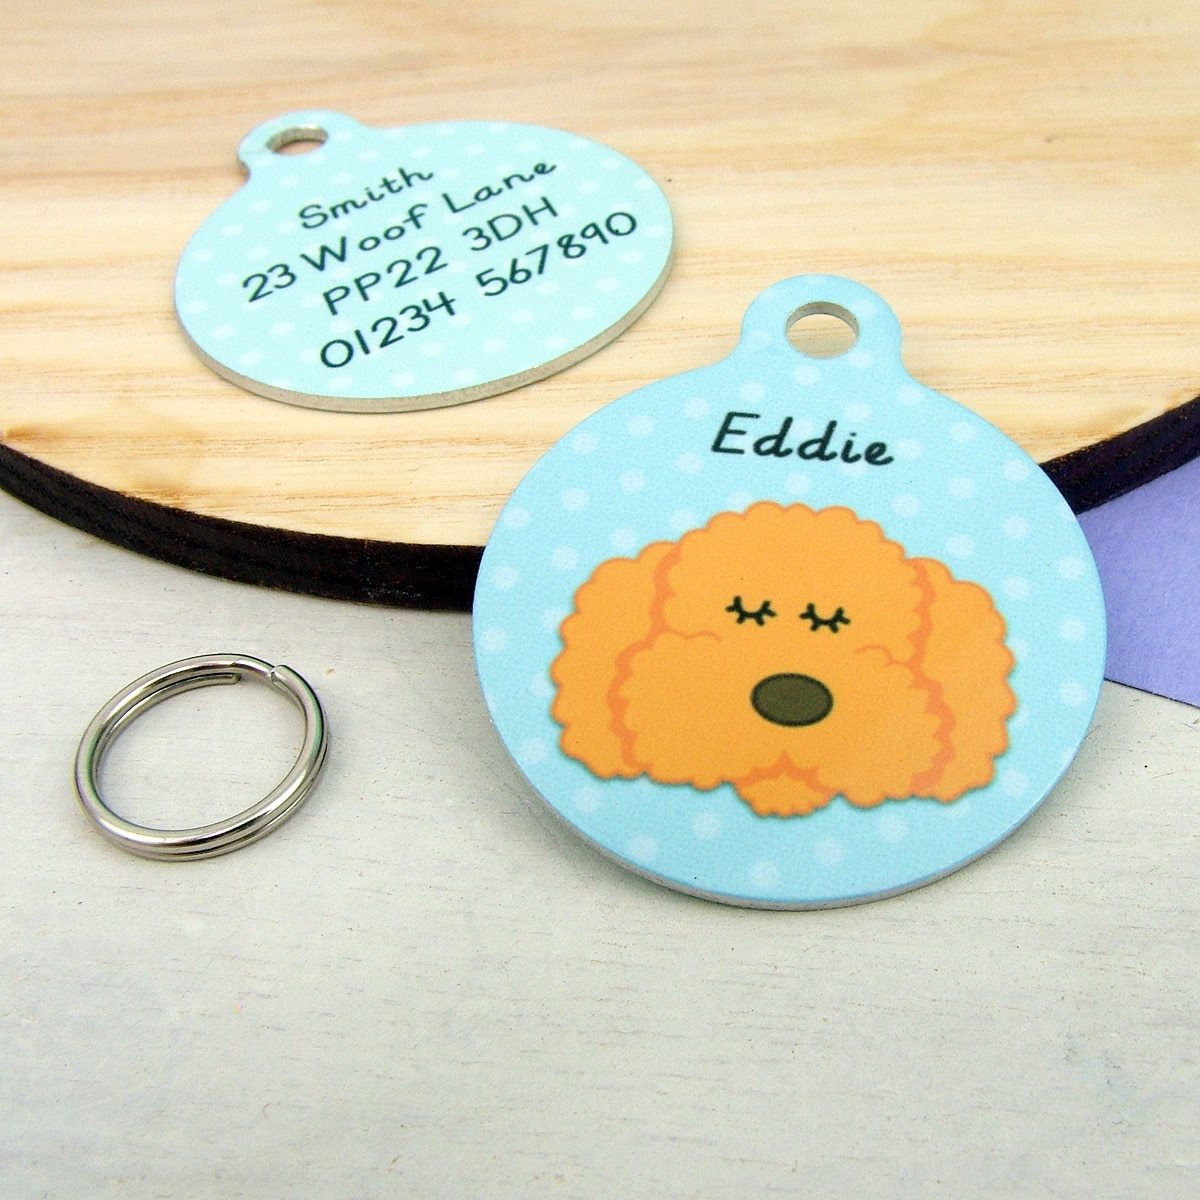 Cockapoo Personalised Dog ID Tag  - Hoobynoo - Personalised Pet Tags and Gifts